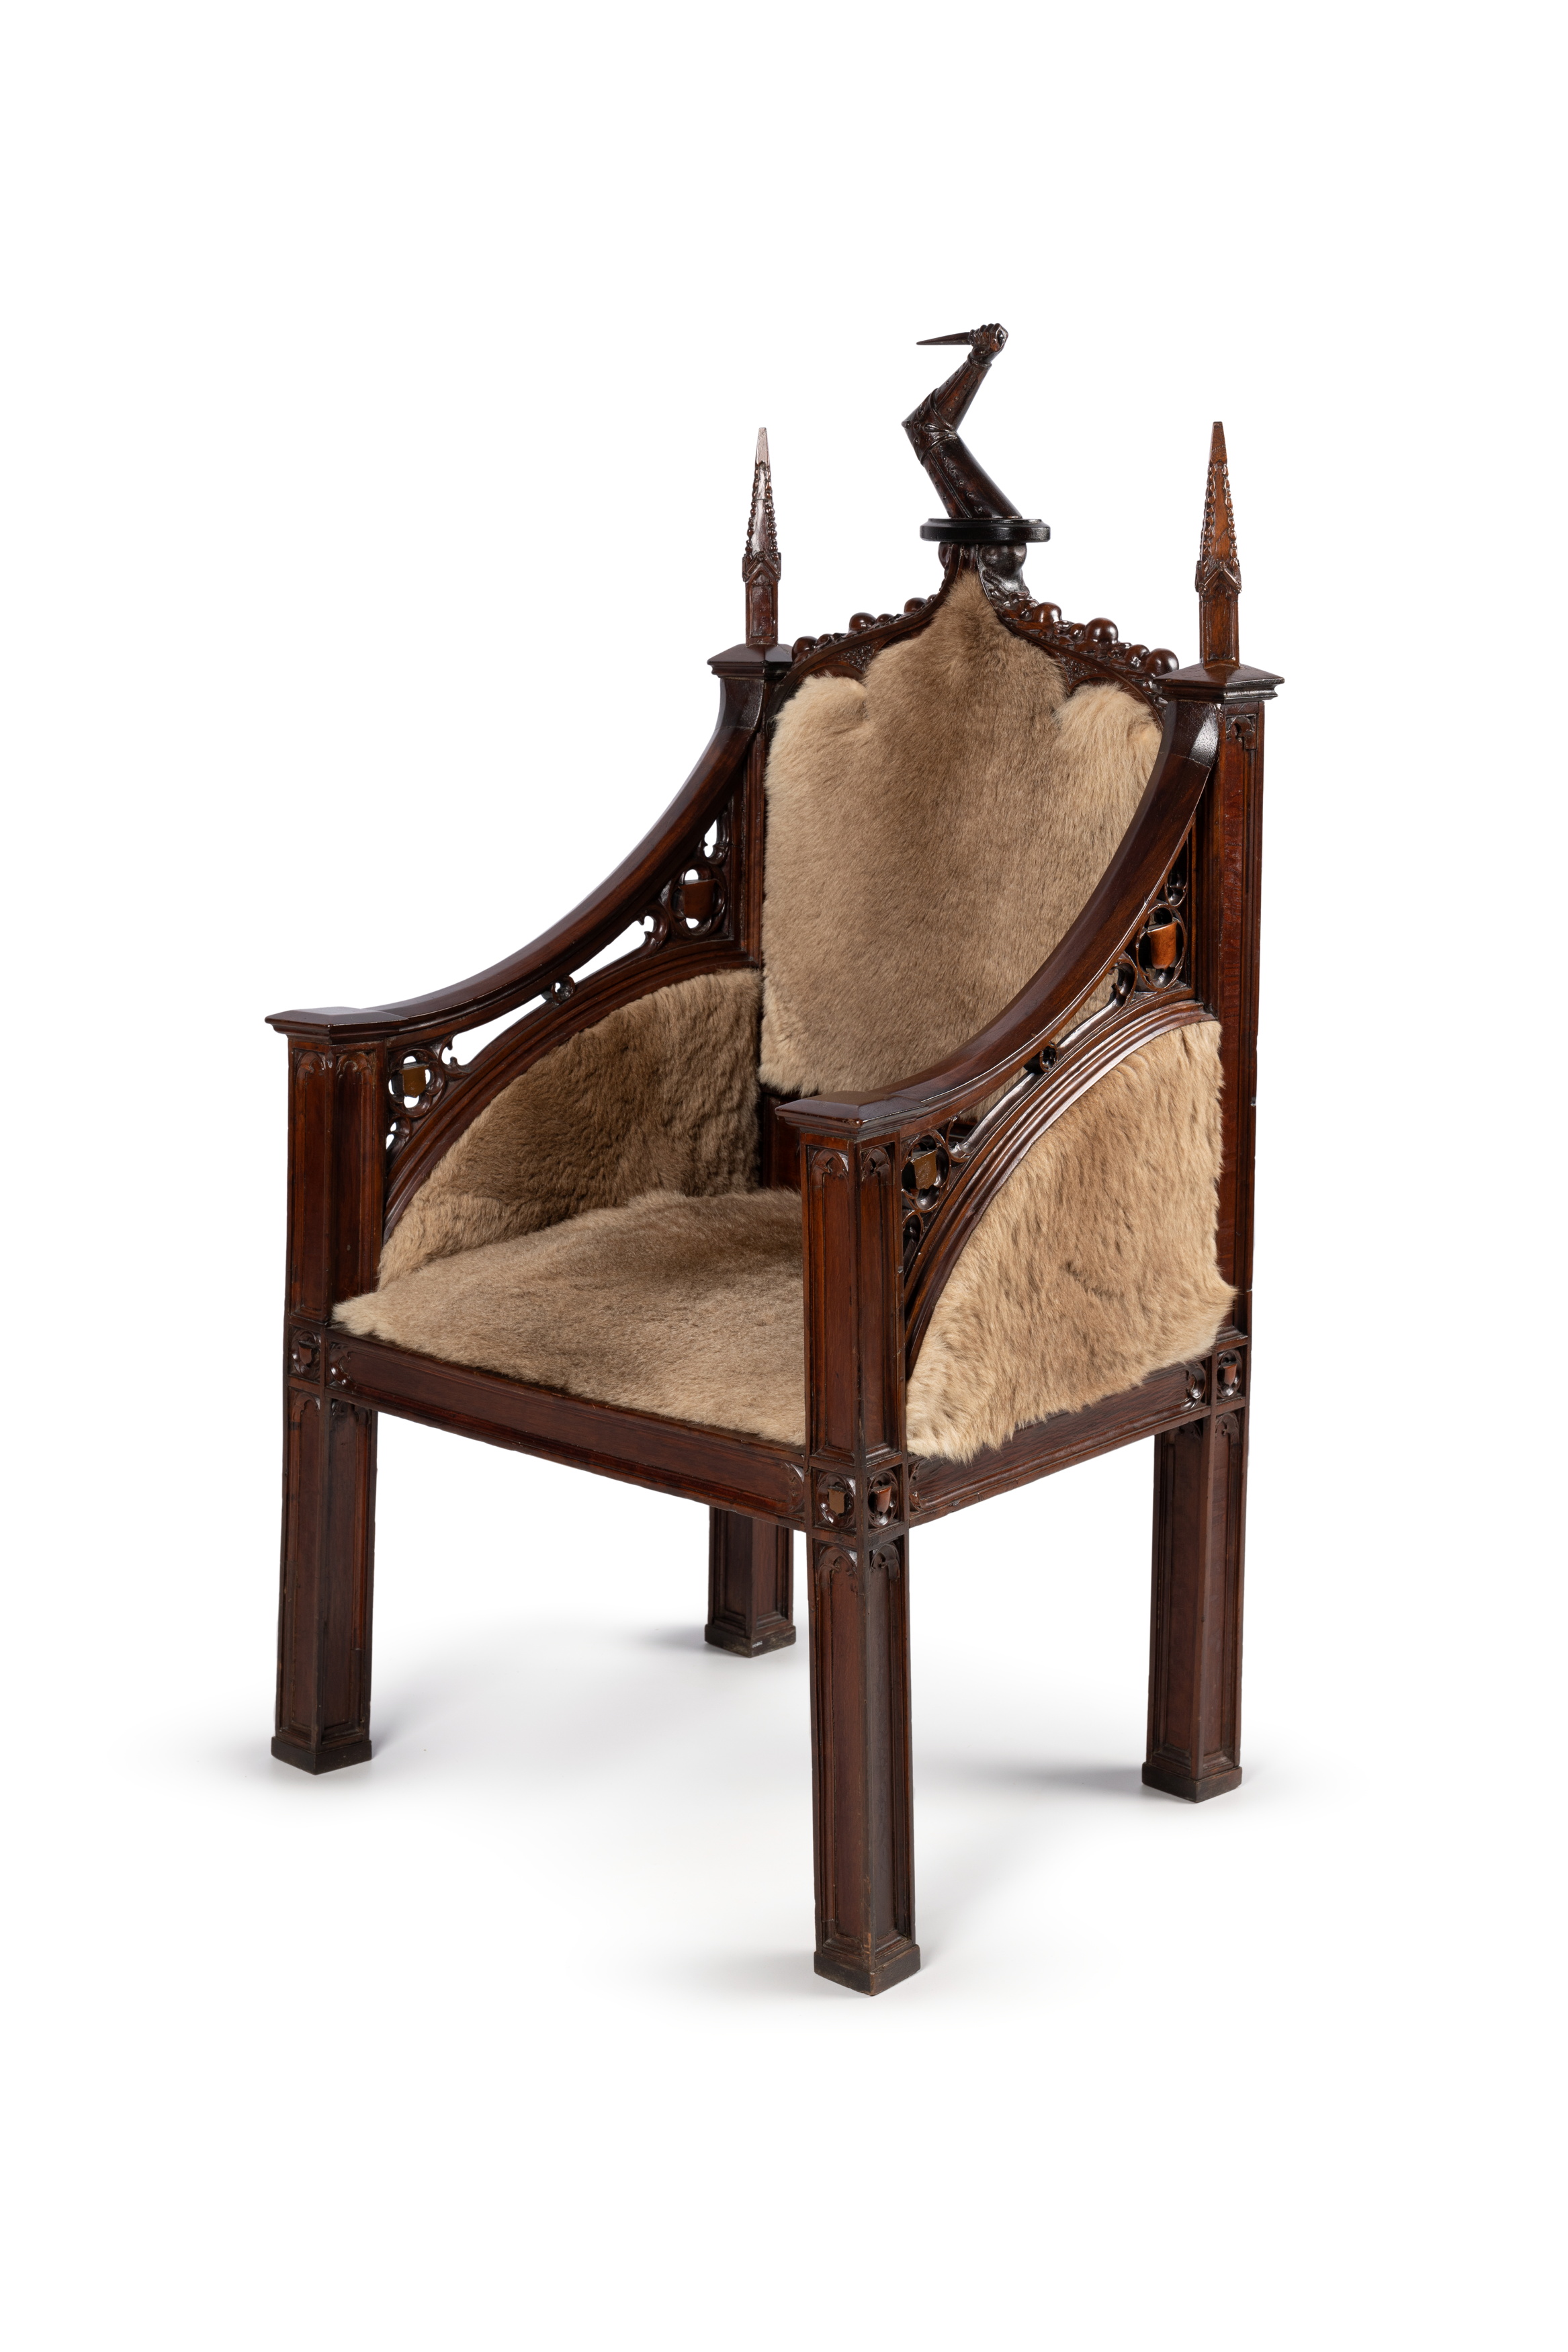 Armchair owned by Governor Lachlan Macquarie